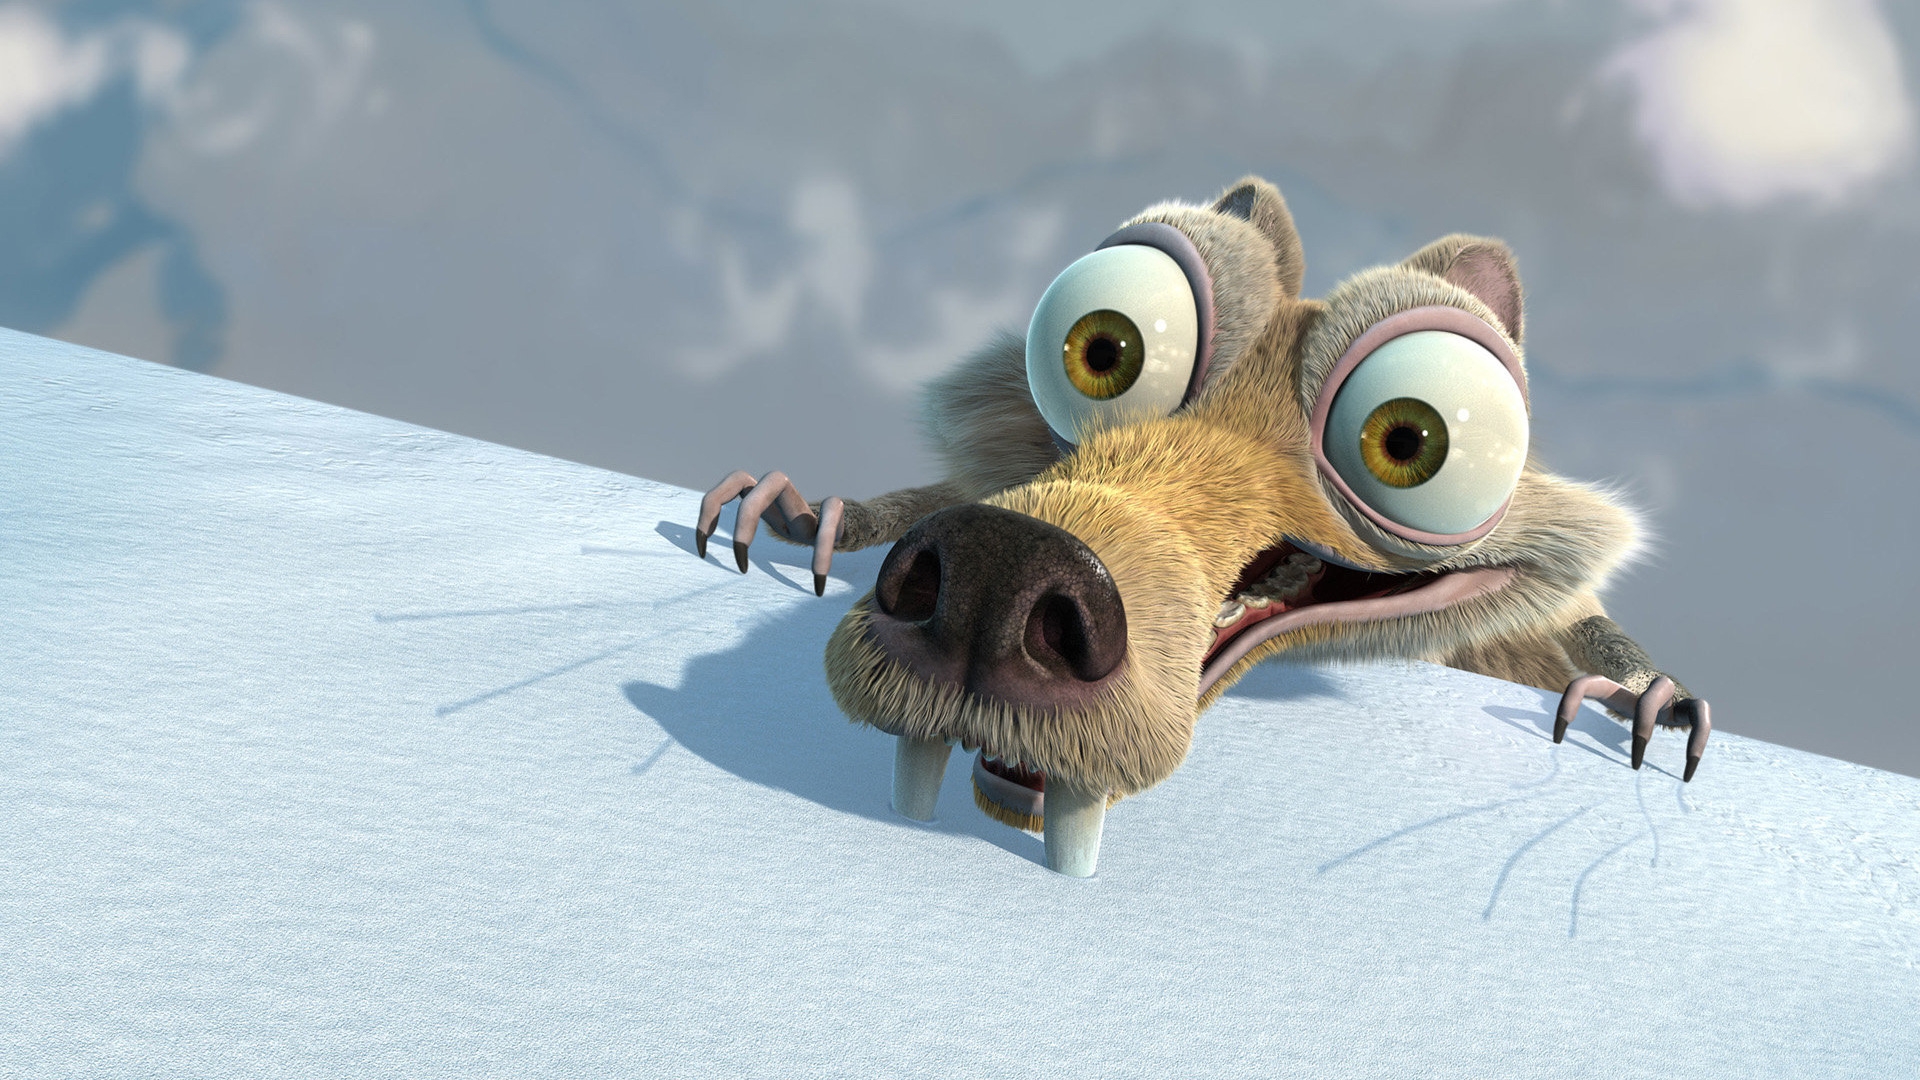 Ice Age Meltdown for 1920 x 1080 HDTV 1080p resolution